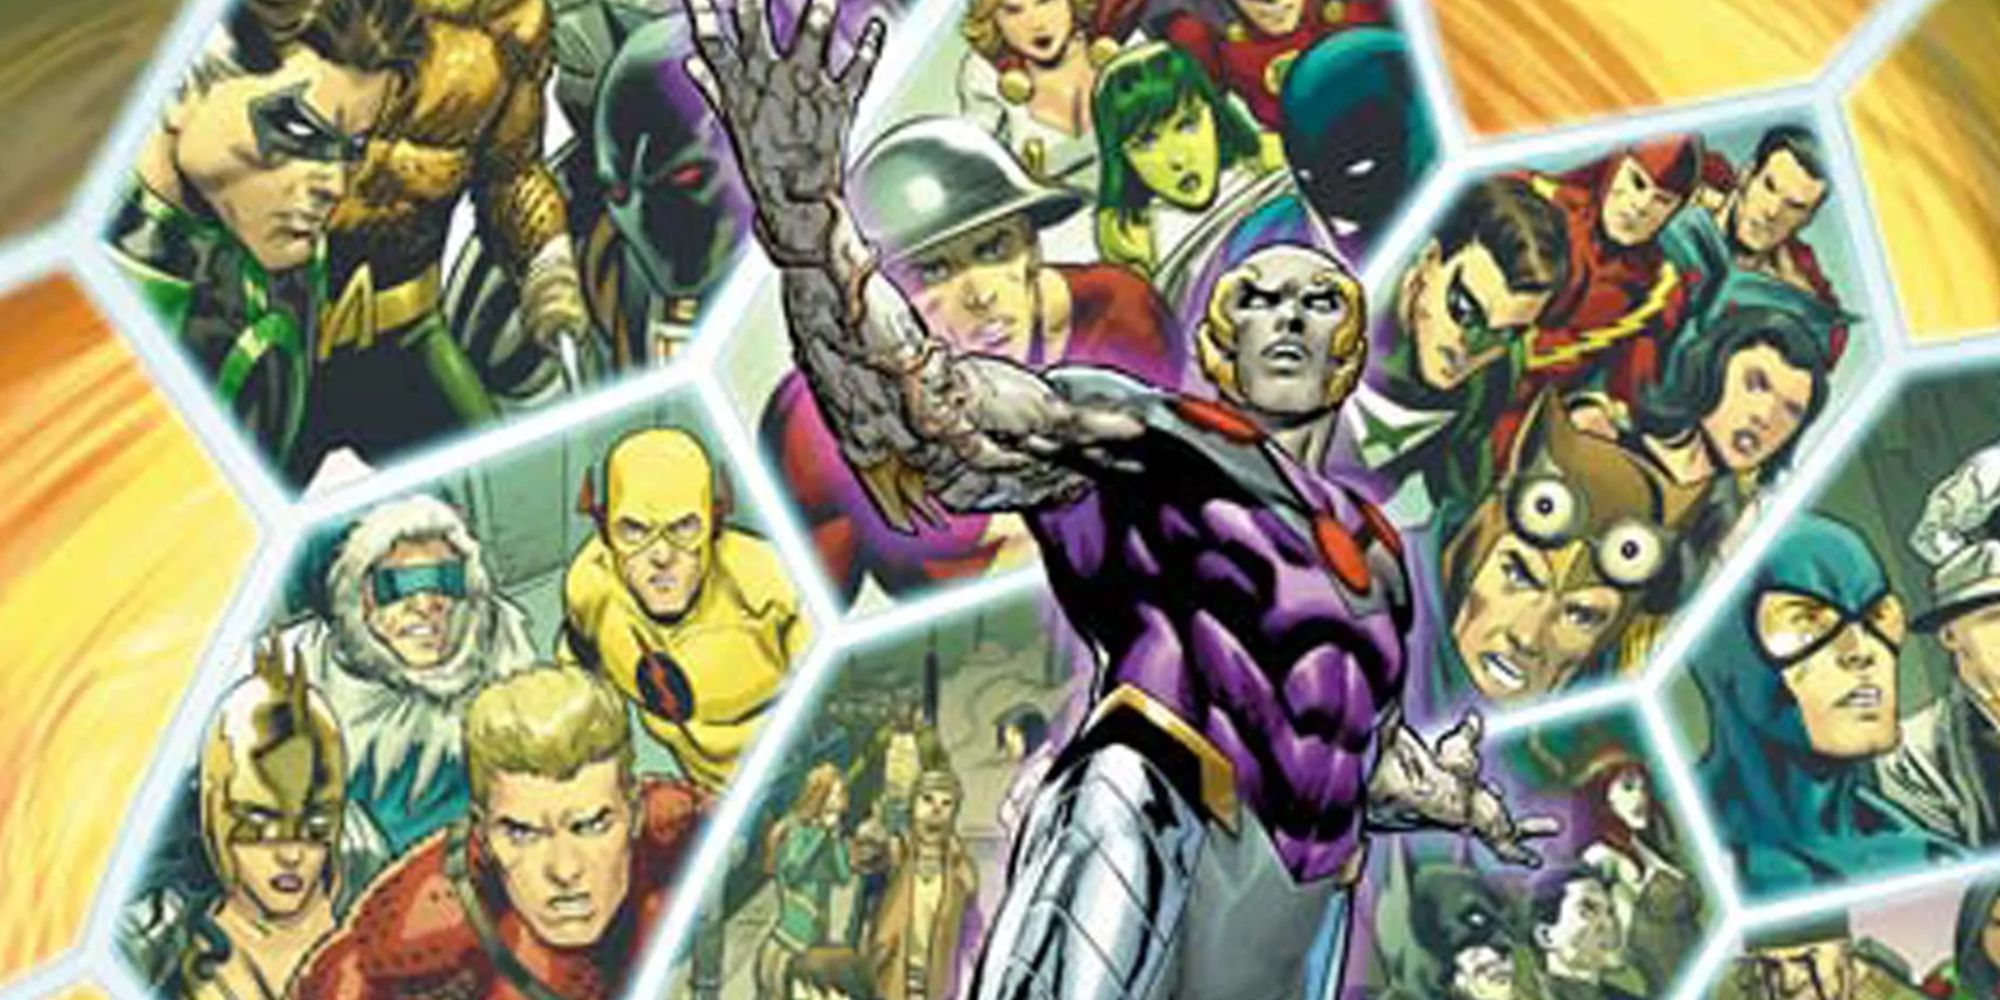 DC Comics' Convergence, featuring Telos and alternate DC Earths and their heroes